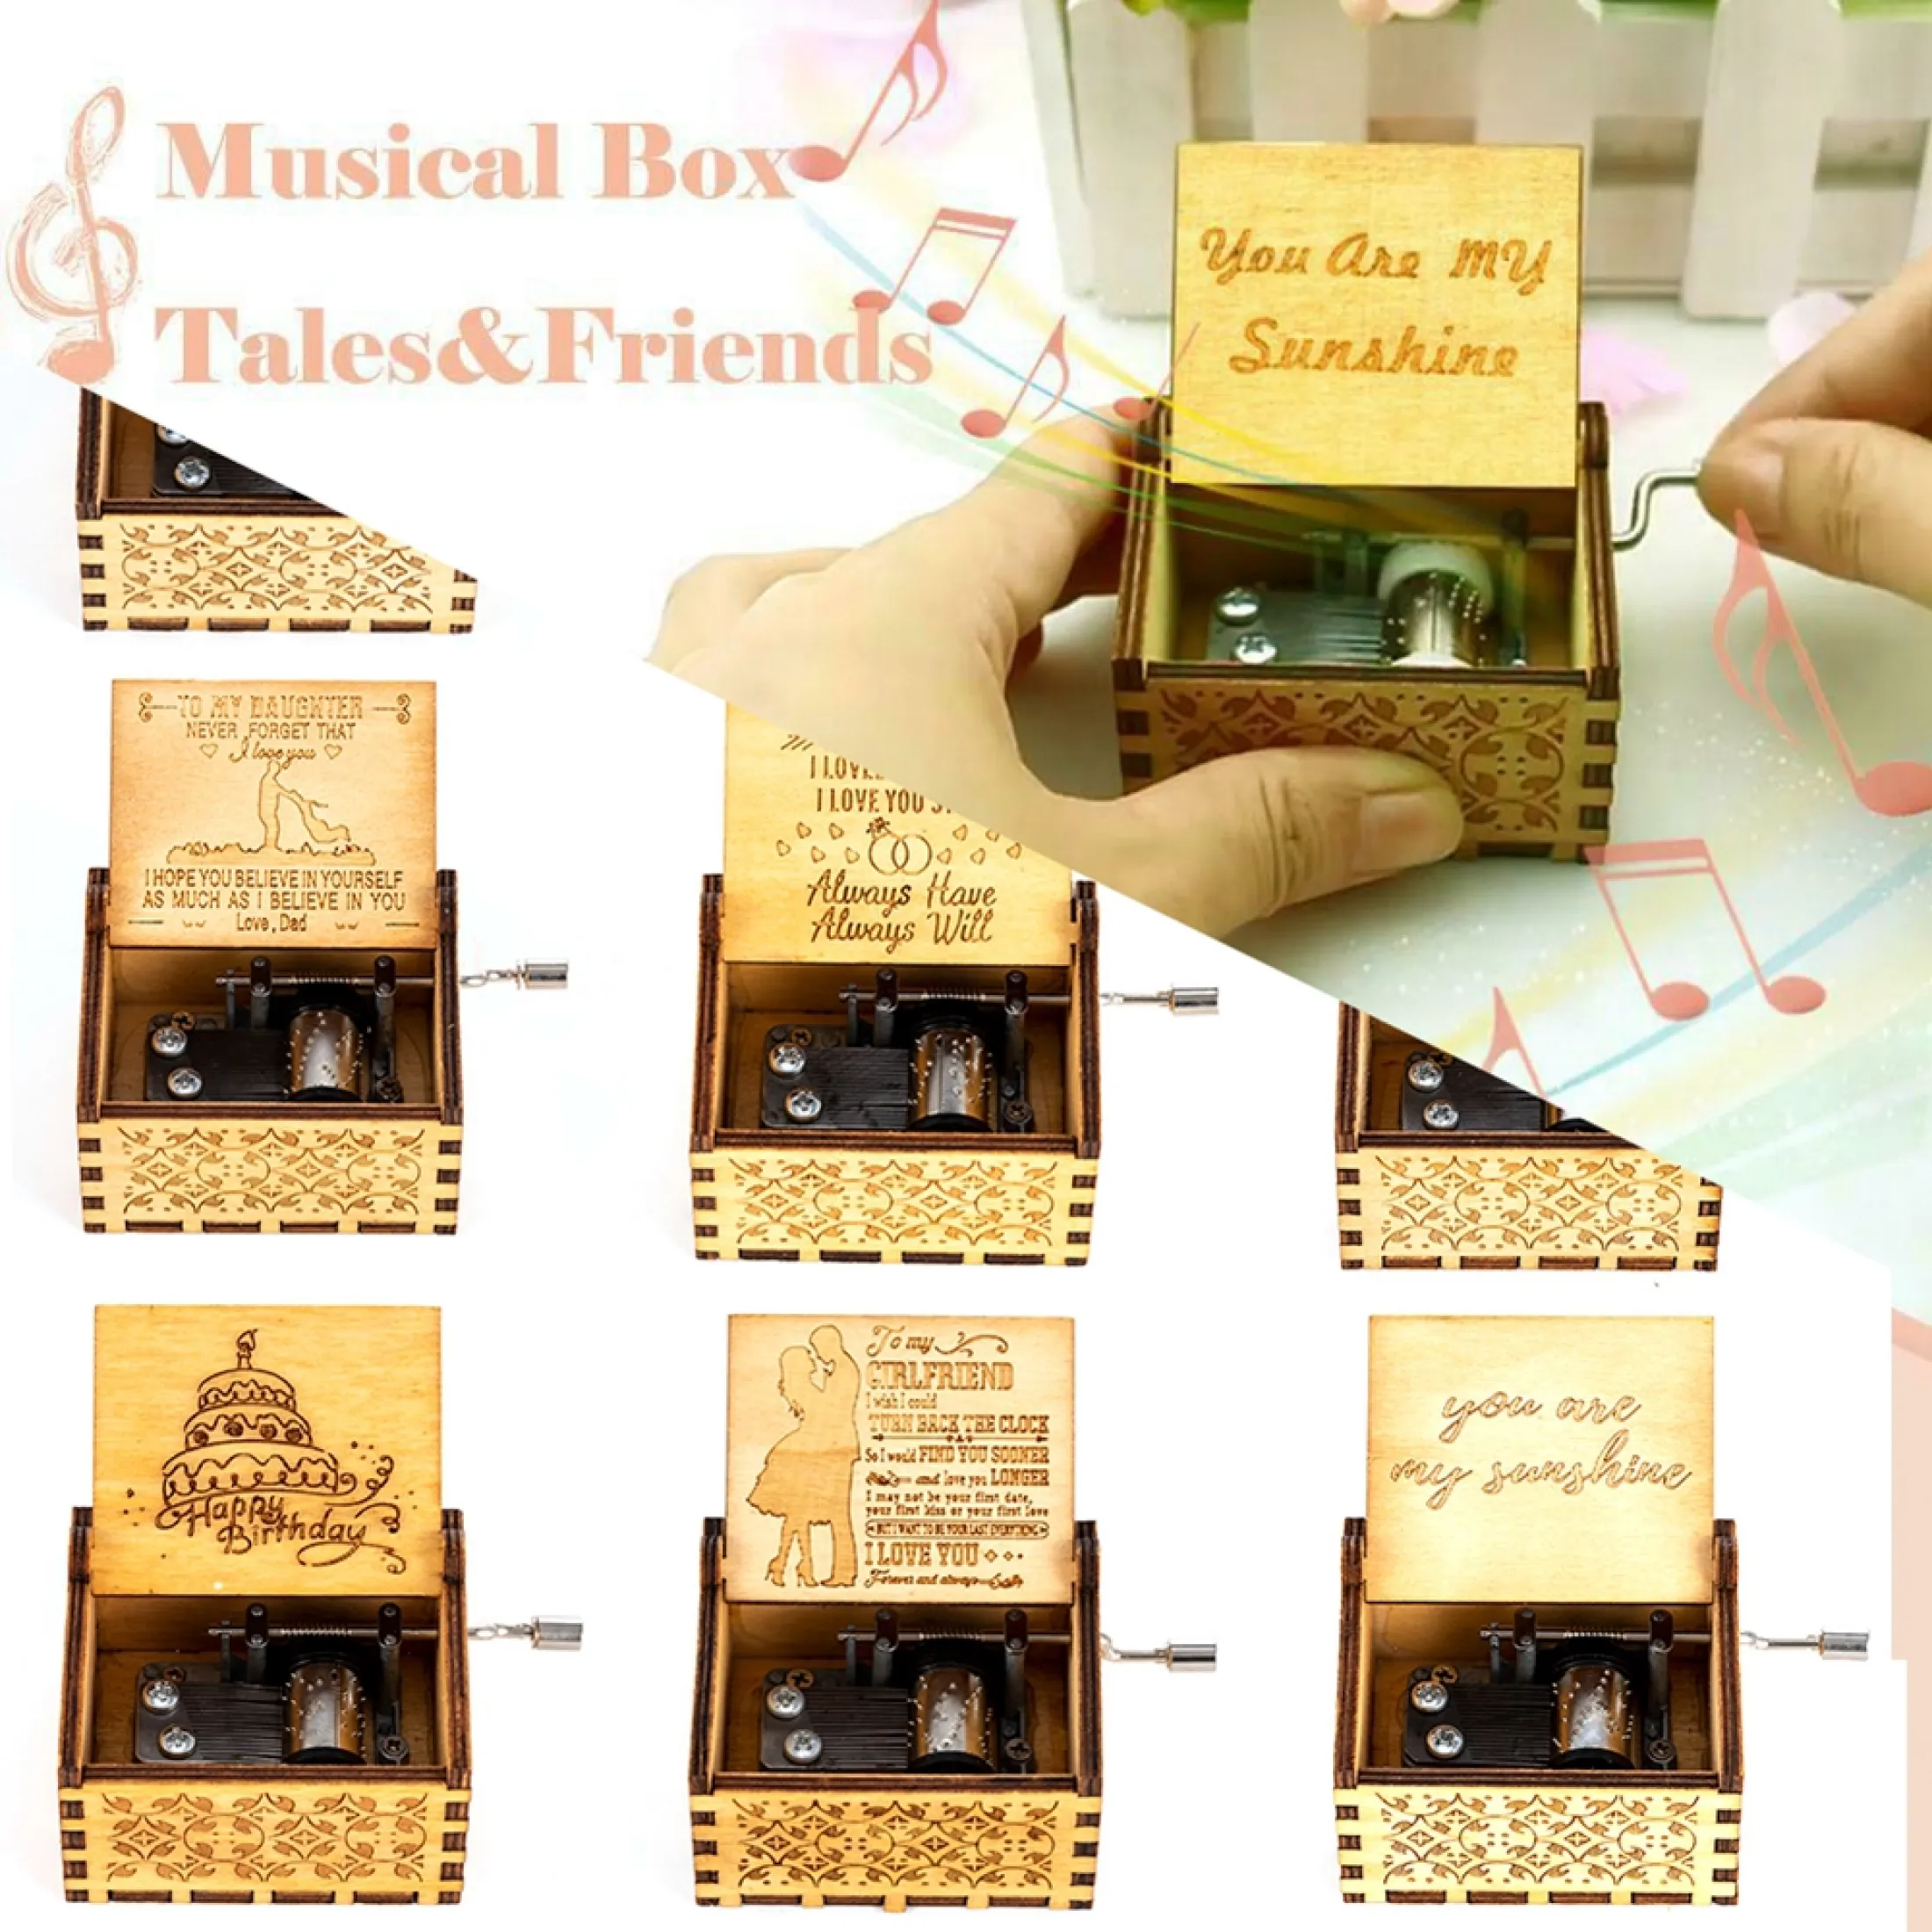 Antique Music Box Wood Hand Cranked Music Box Toys Home Crafts Ornaments Decor